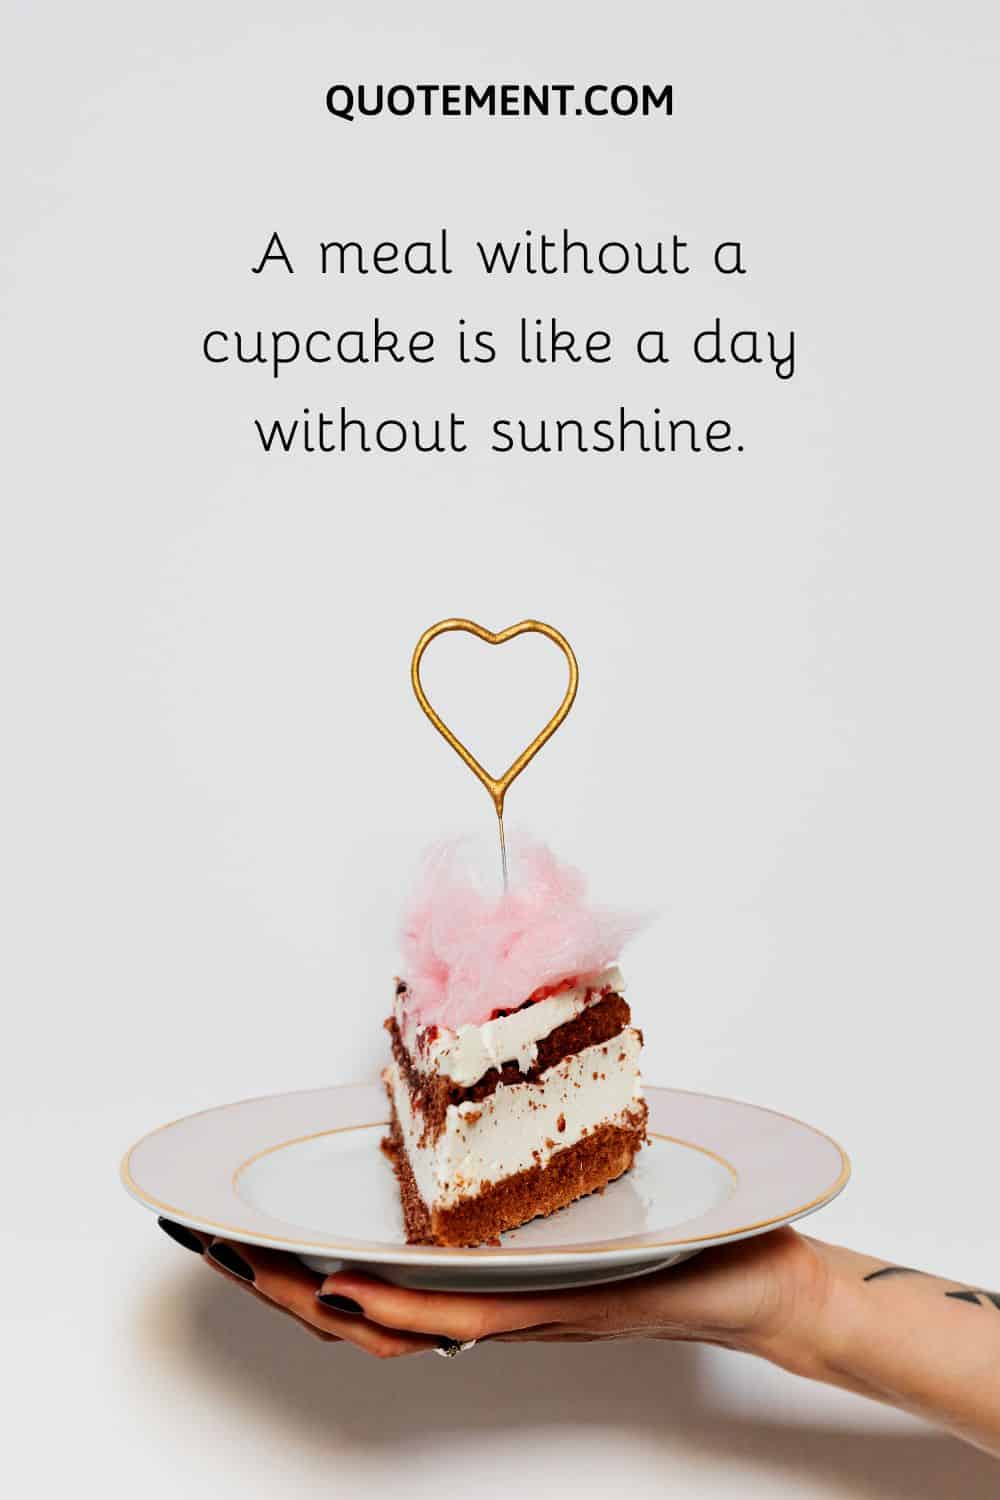 A meal without a cupcake is like a day without sunshine